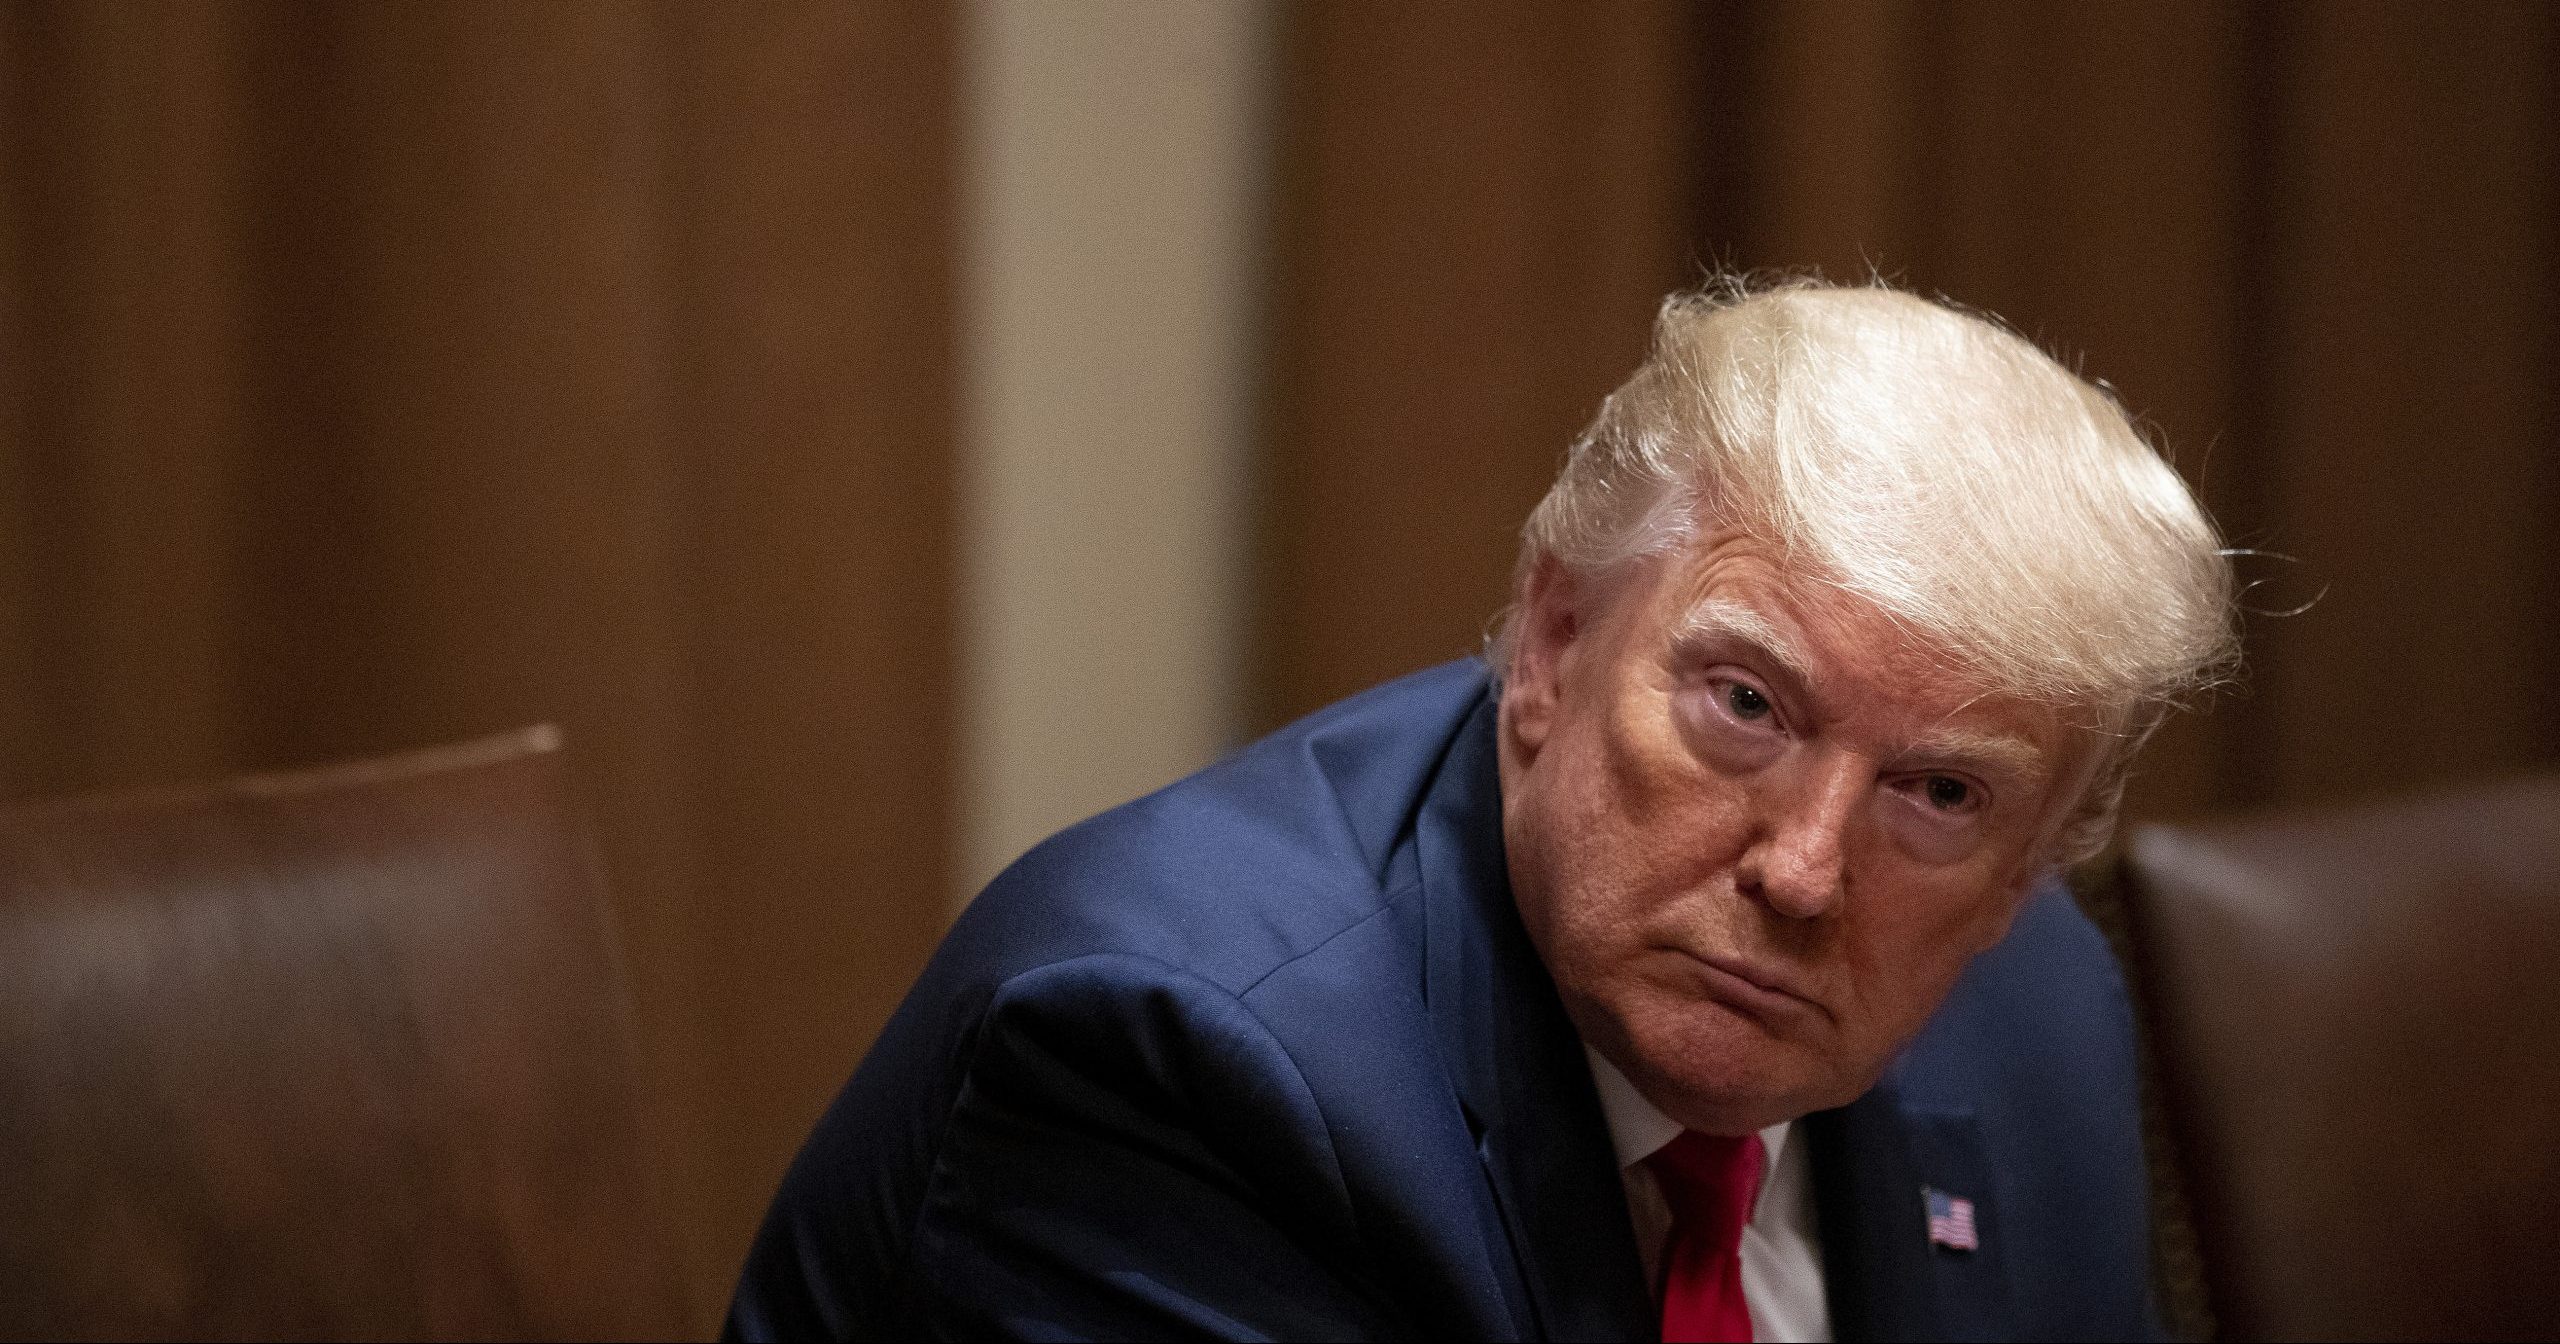 President Donald Trump listens during a roundtable discussion with African-American supporters in the Cabinet Room of the White House on June 10, 2020, in Washington, D.C.